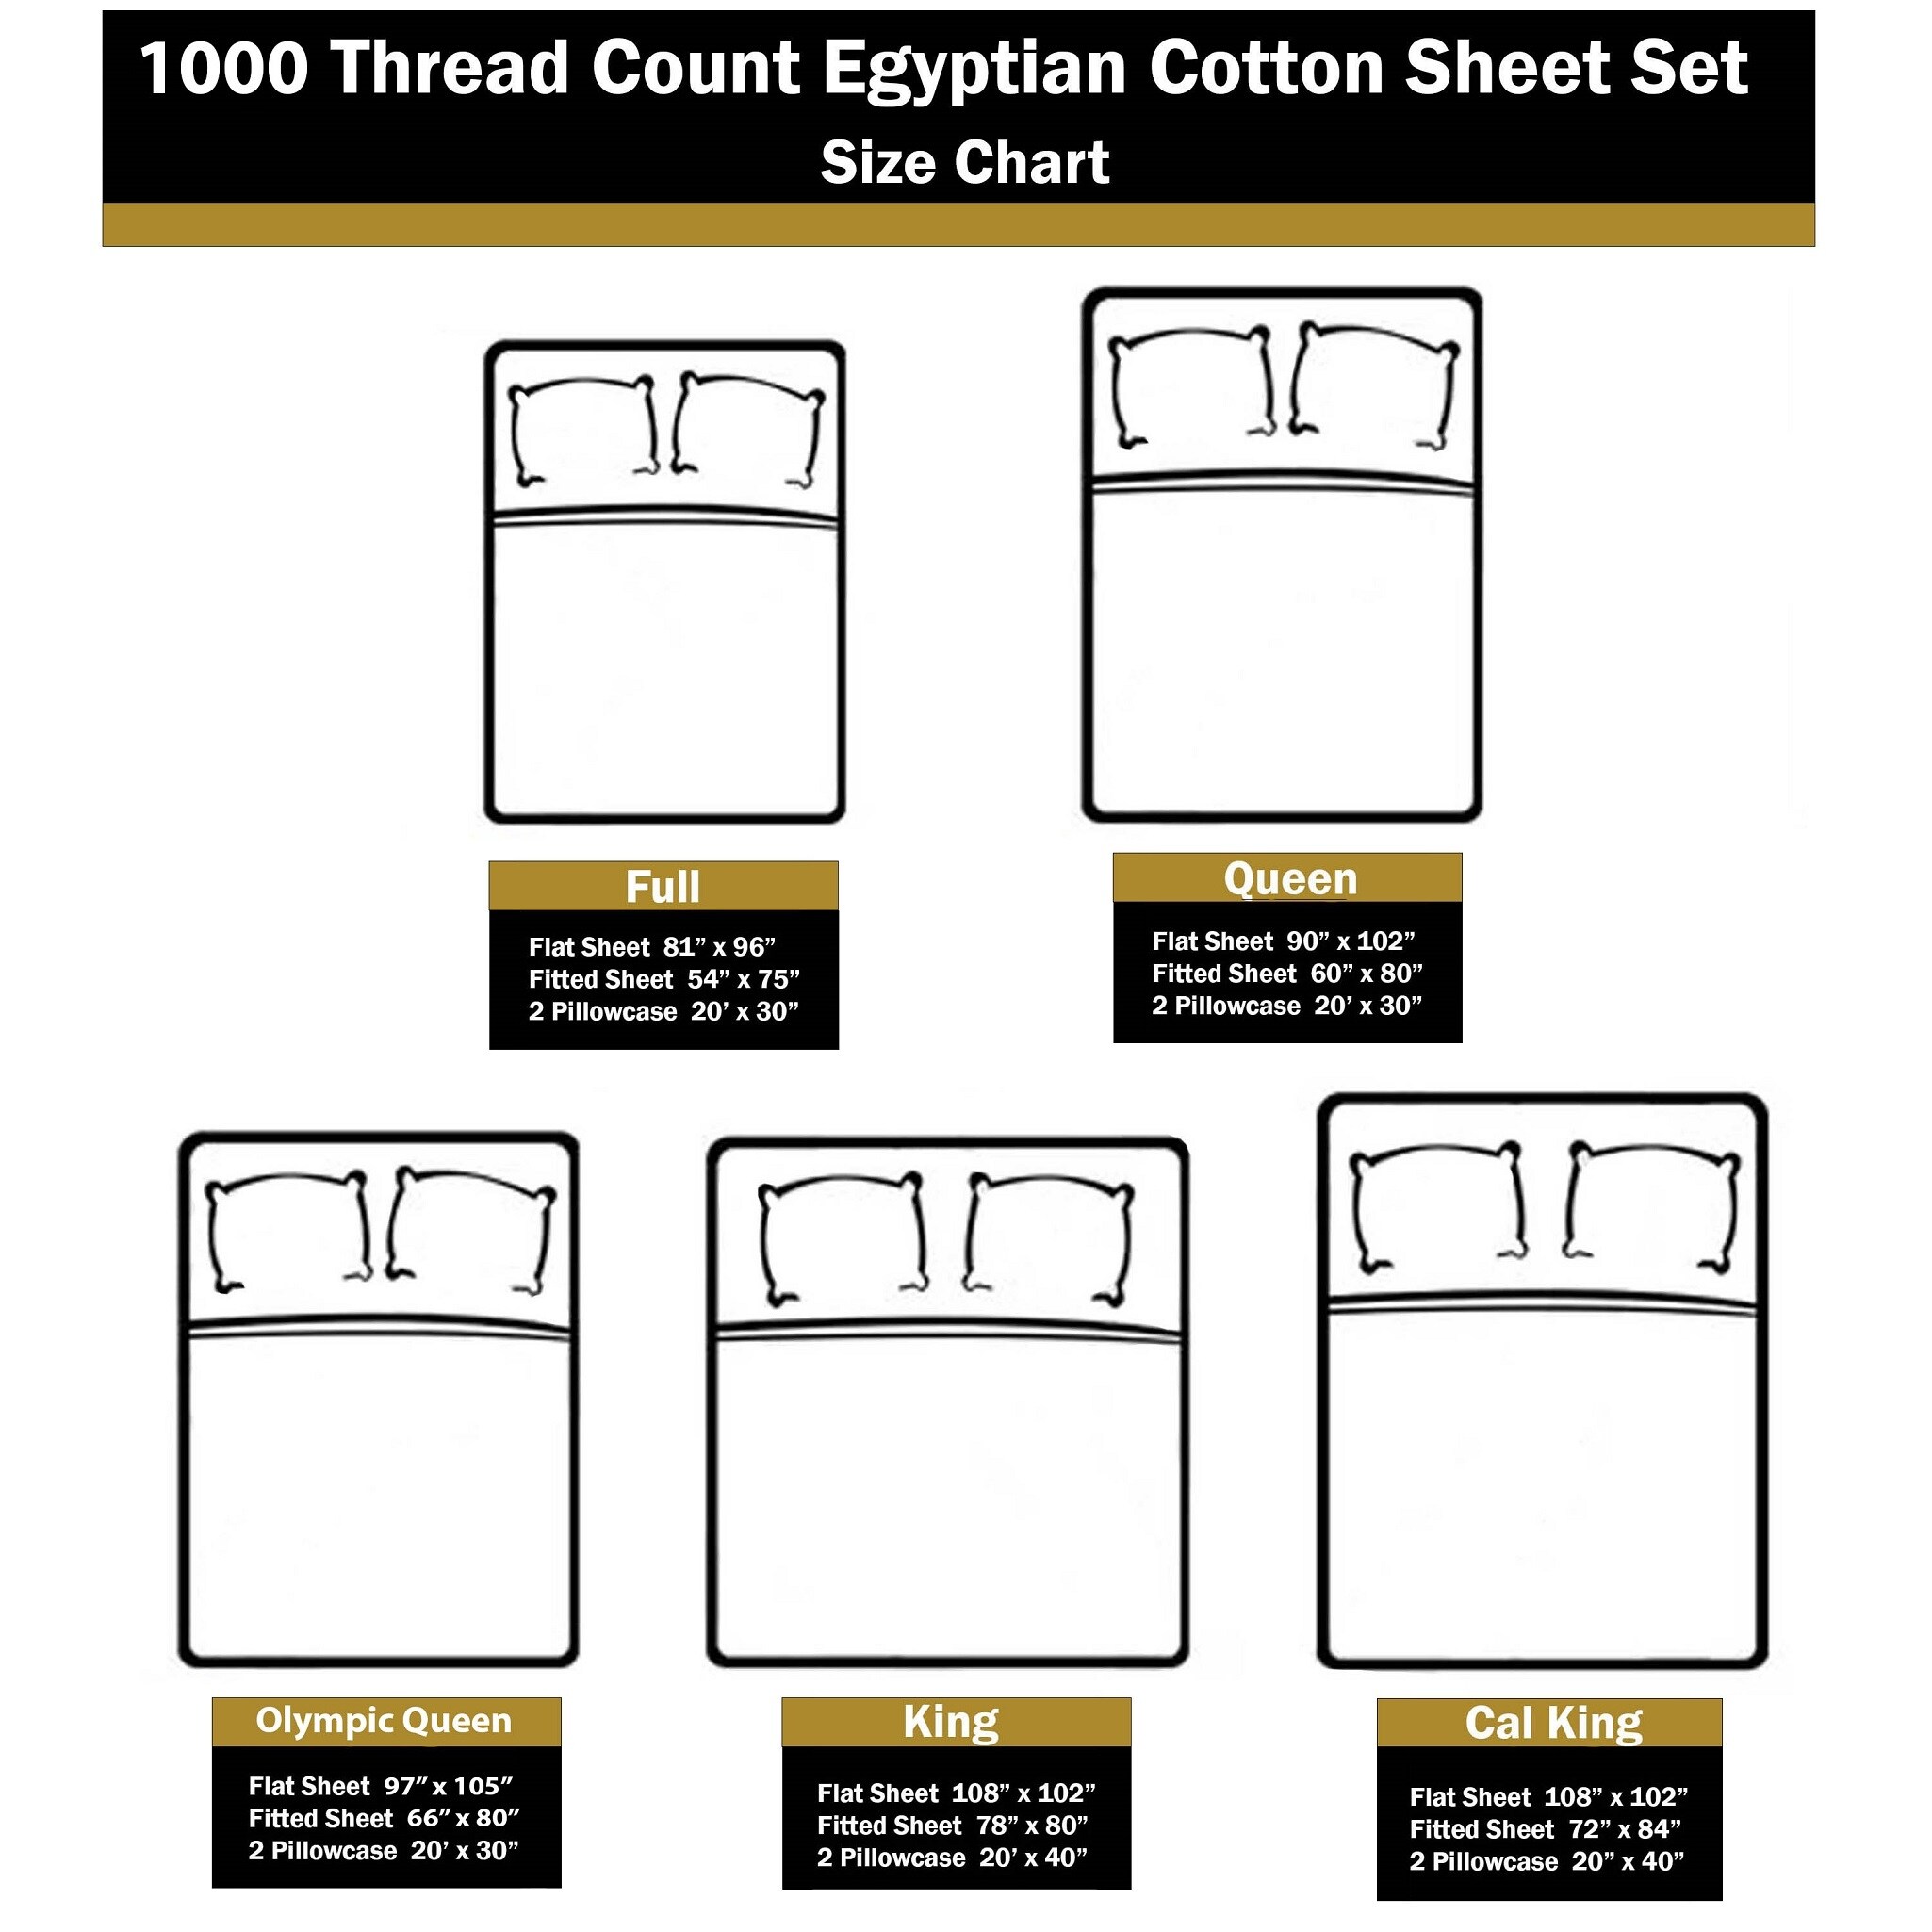 6 PCs Sheet Set Egyptian Cotton 1000 Thread Count Solid Colors Olympic Queen